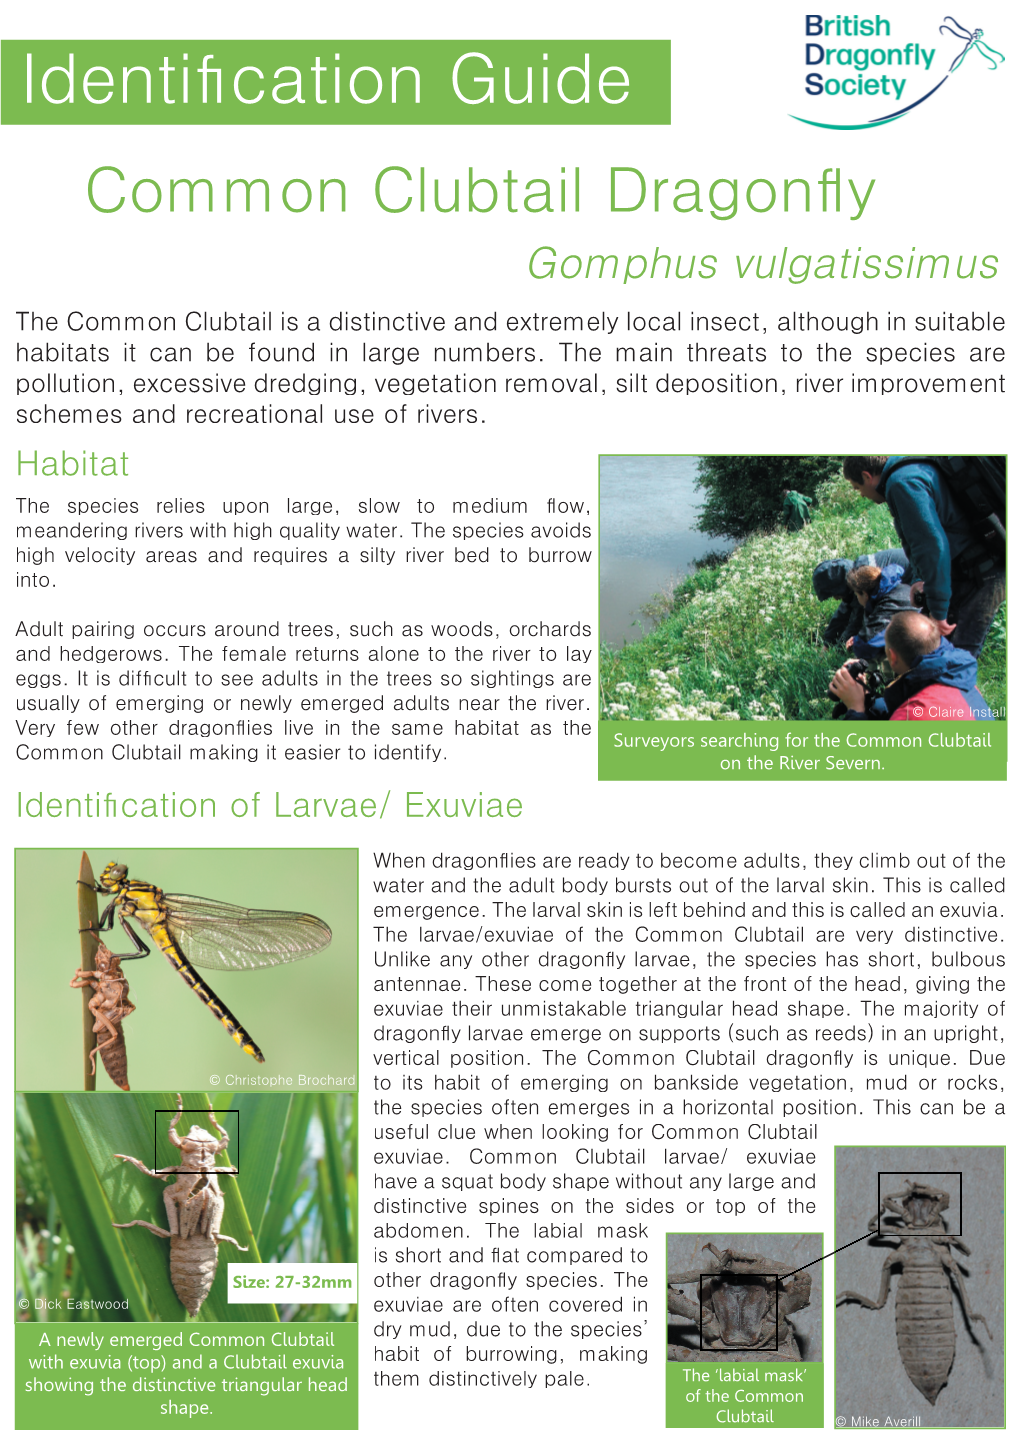 Id Guide Gomphus.Indd